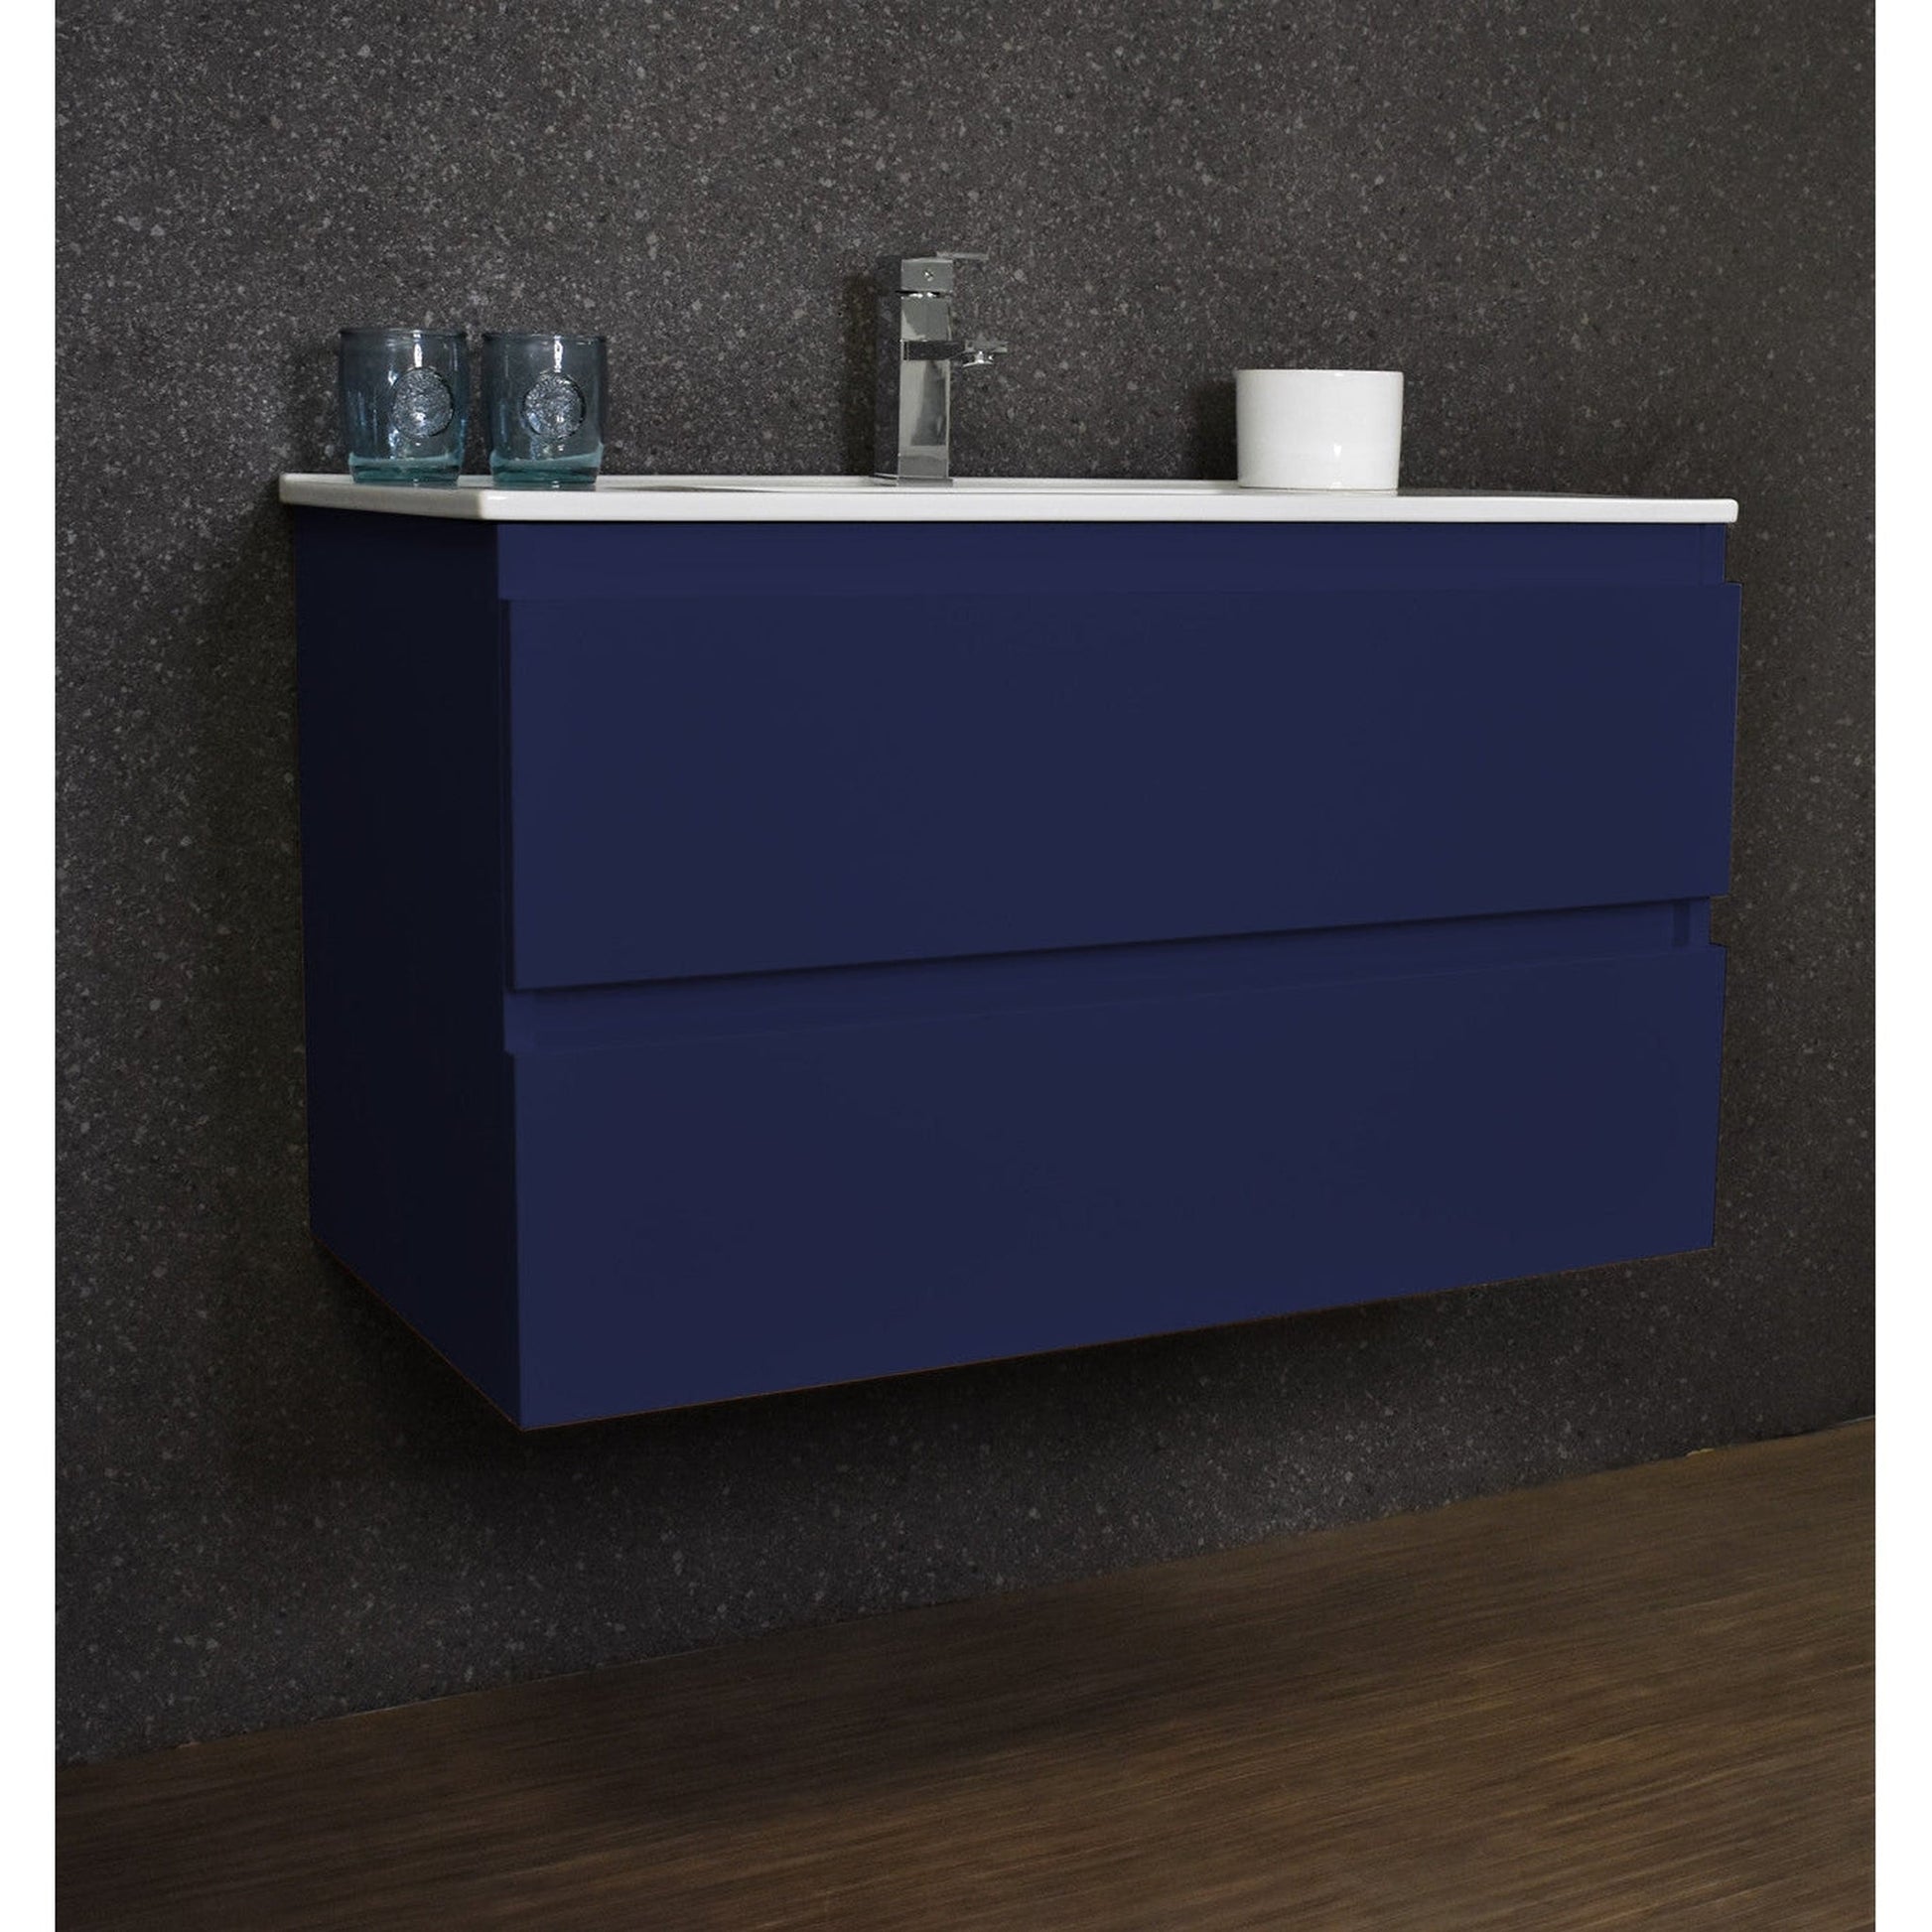 Volpa USA Salt 36" x 18" Navy Wall-Mounted Floating Bathroom Vanity With Drawers, Integrated Porcelain Ceramic Top and Integrated Ceramic Sink